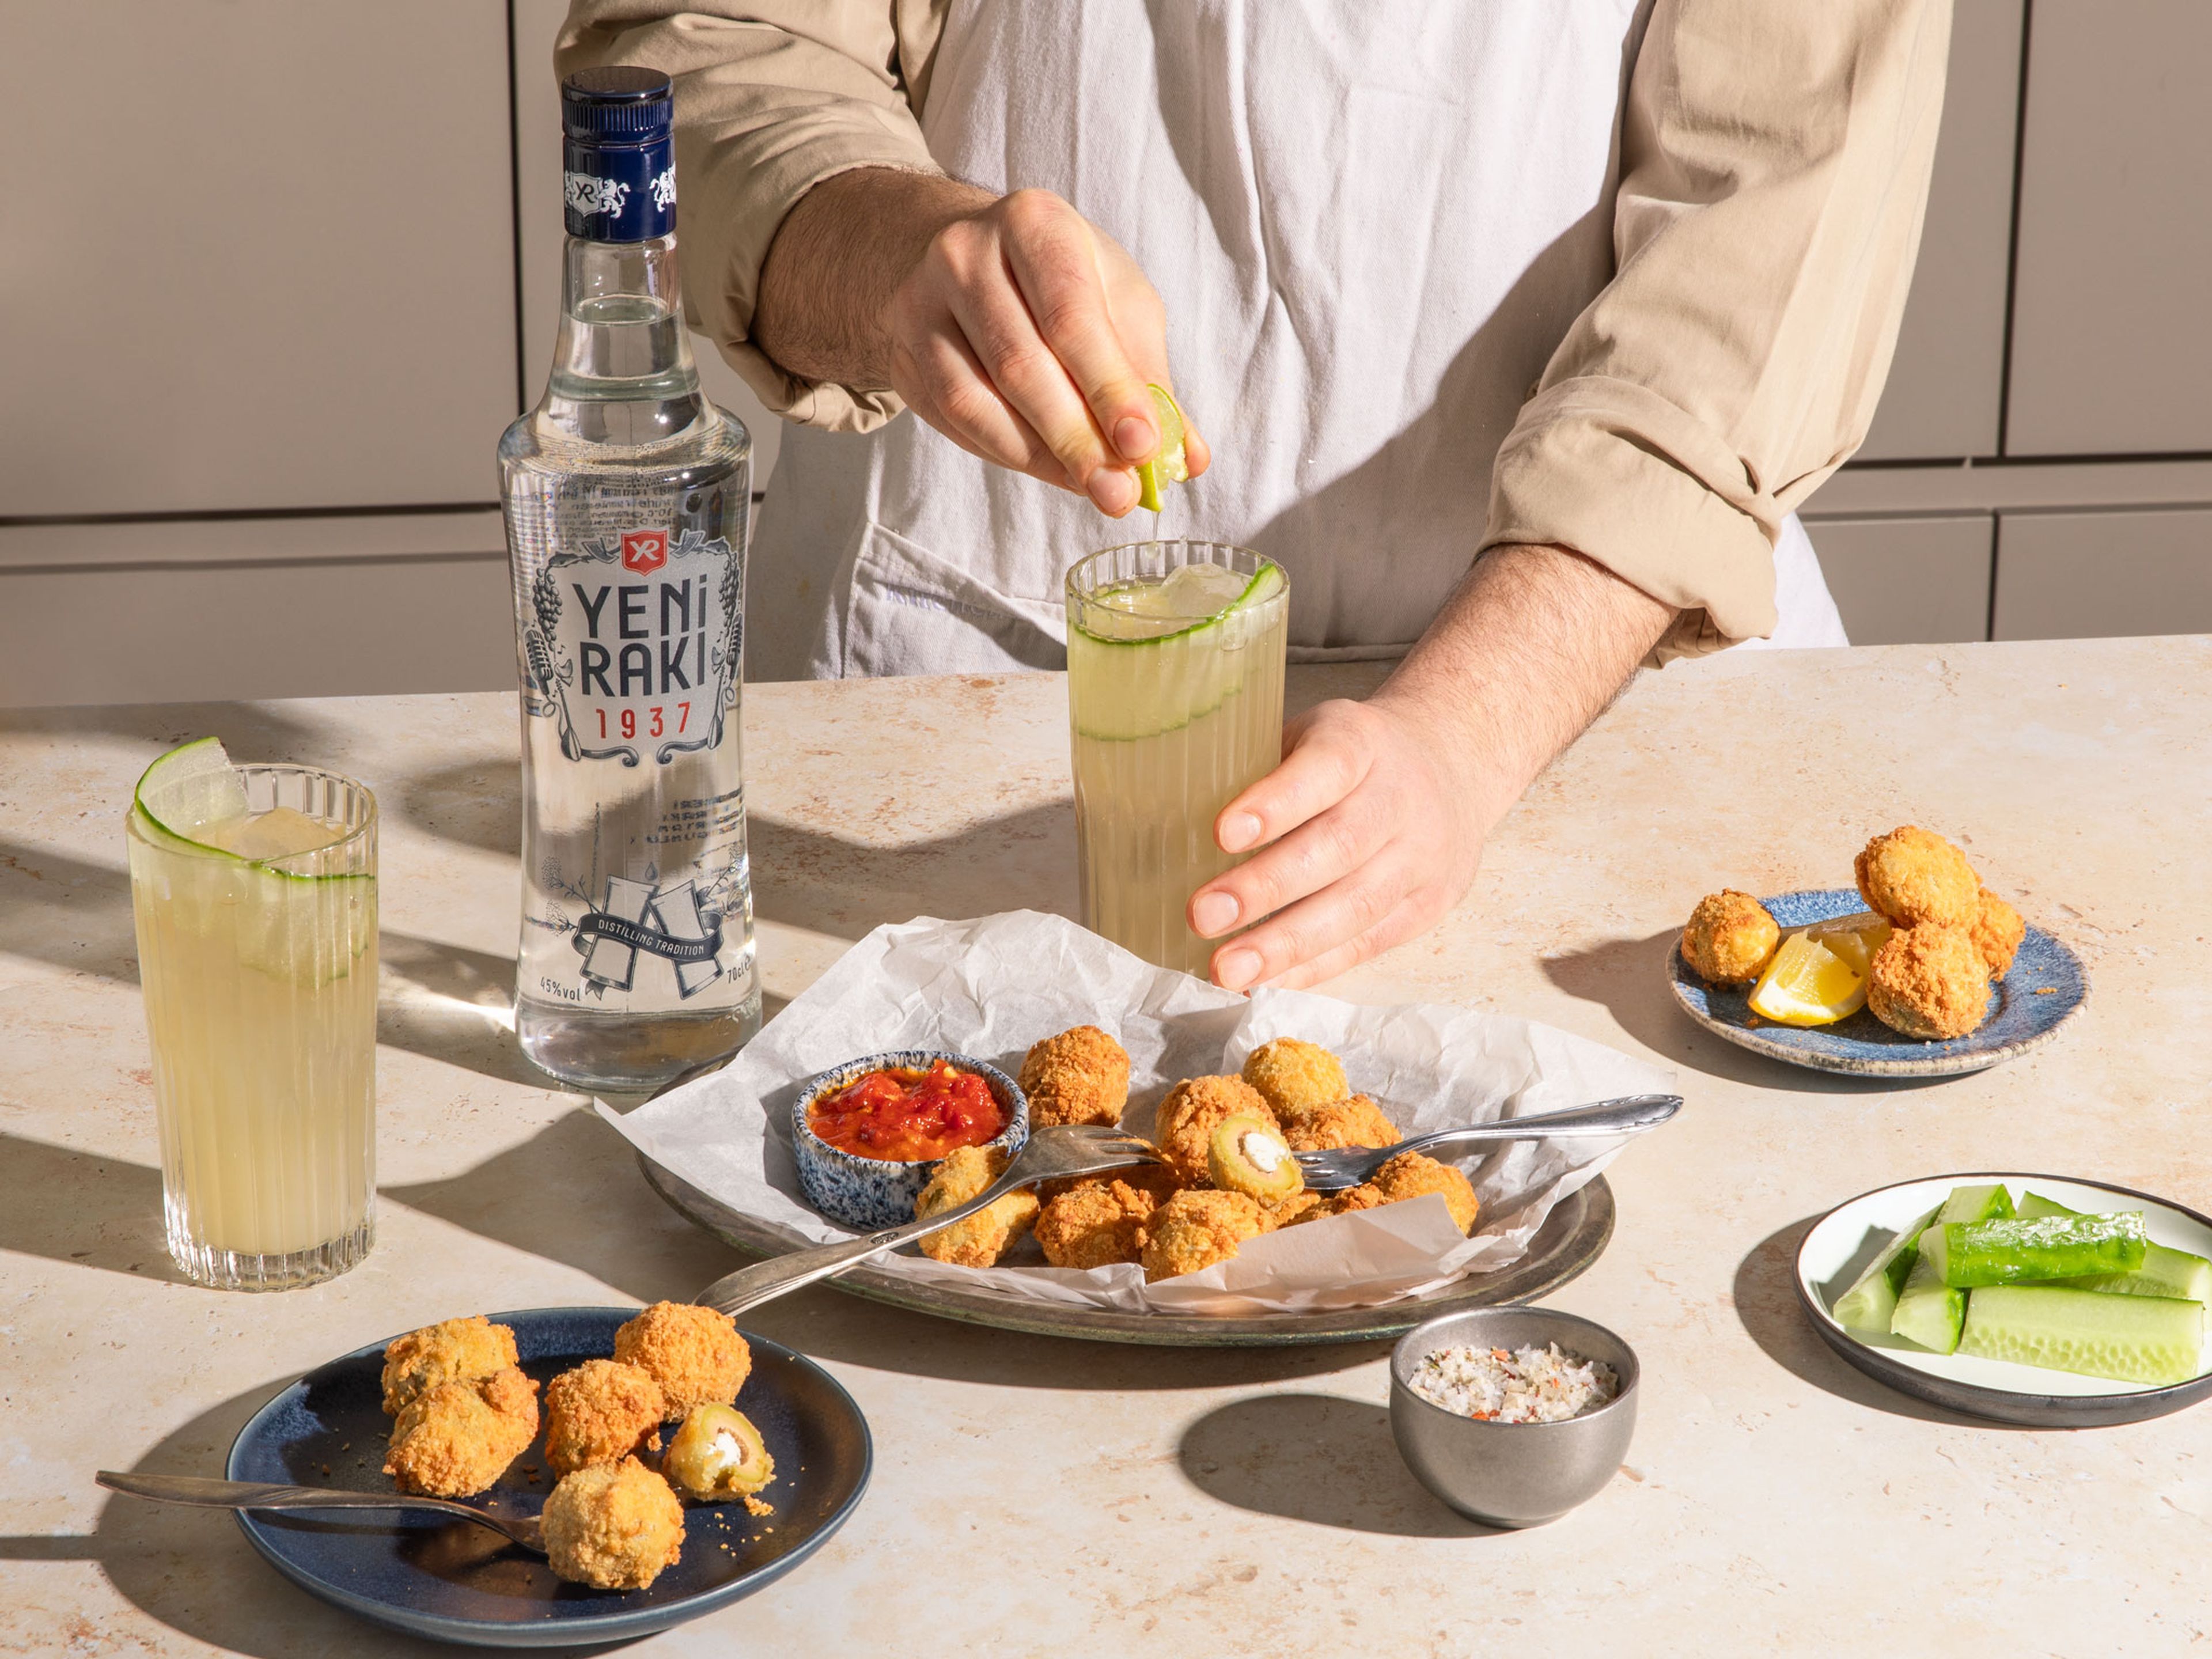 Serve with the tomato jam and some lemon, if desired. For the best meze experience, serve the classic drink Yeni Rakı with water in a rakı glass or with the cocktail "Istanball".